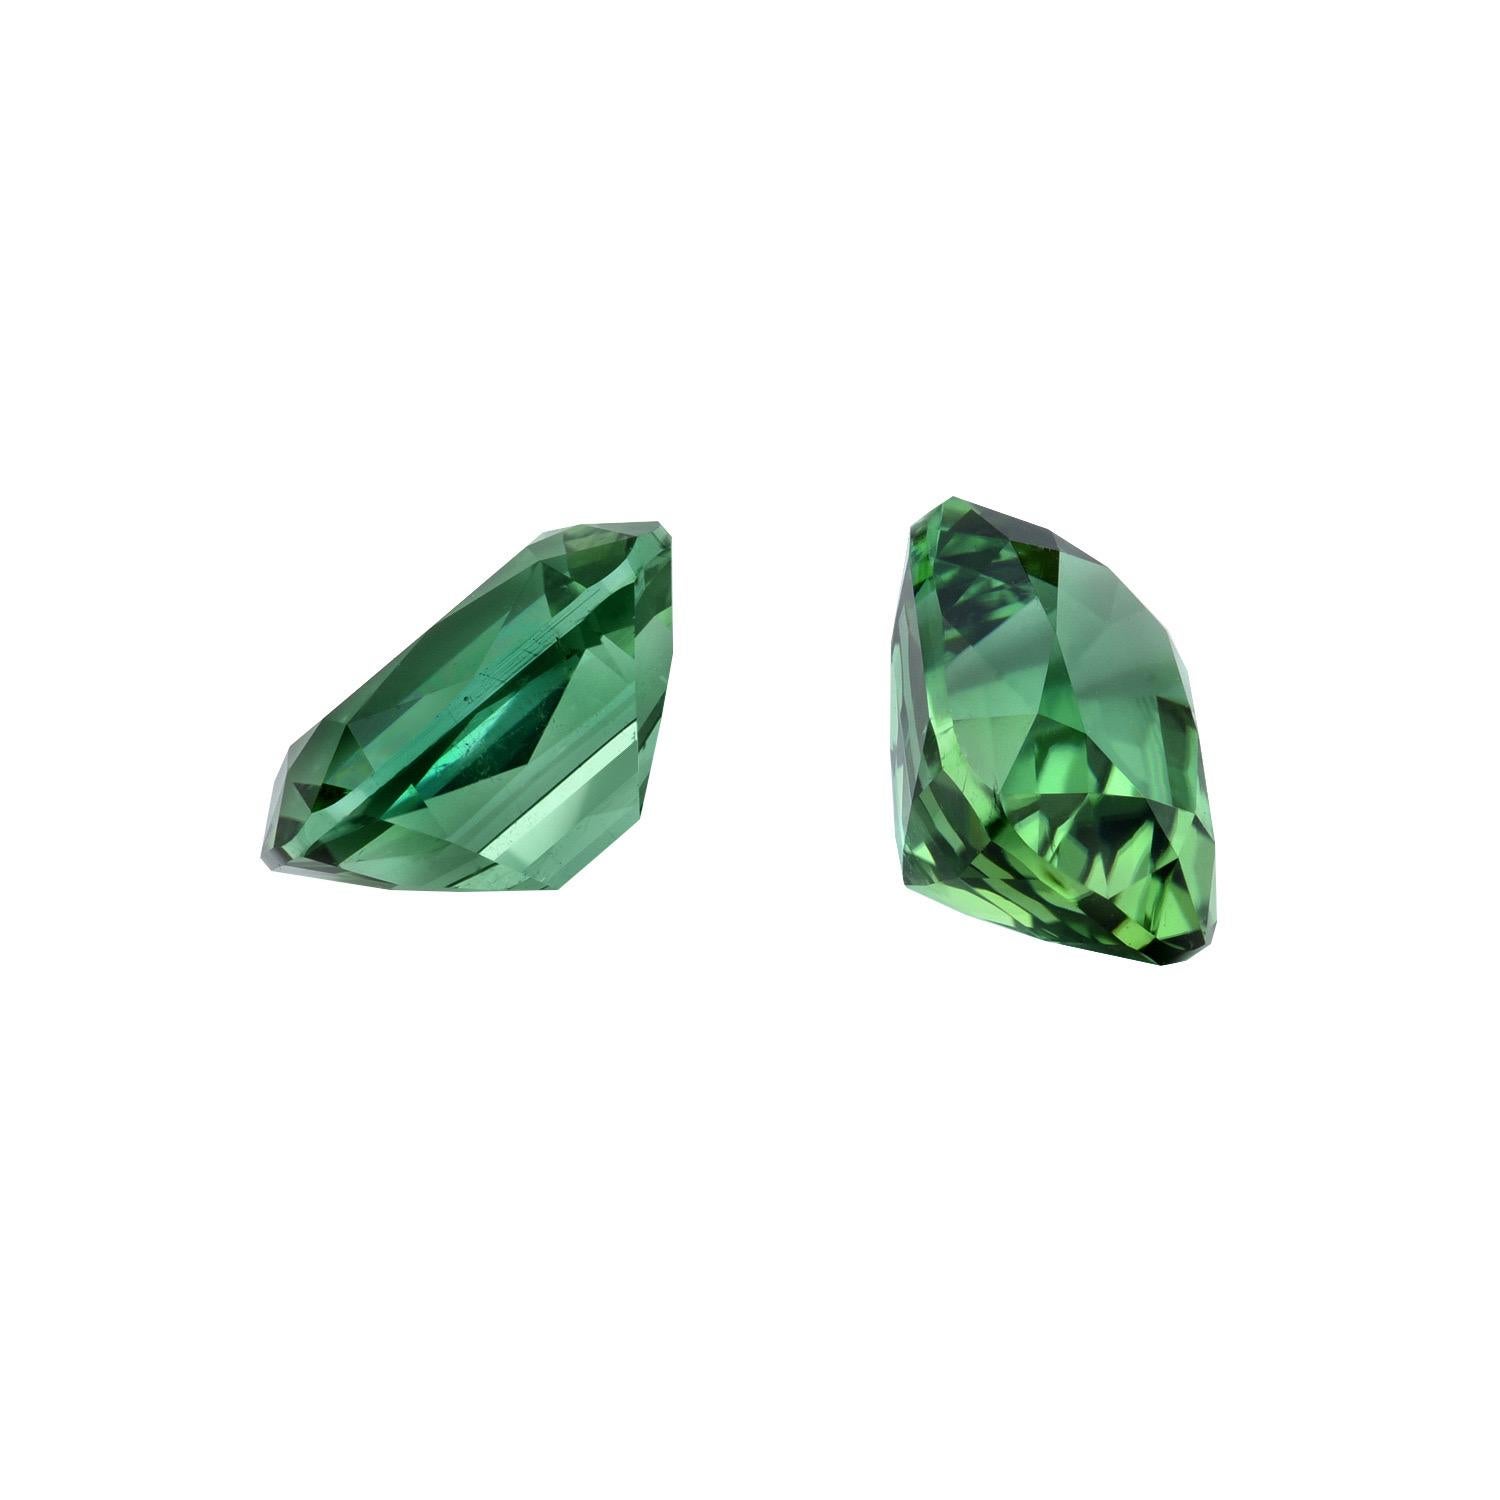 5.56 Carat Mint Green Tourmaline cushion loose gemstone pair, offered unmounted to an exclusive gemstone connoisseur.
Dimensions: 9.5 x 7.4 mm.
Returns are accepted and paid by us within 7 days of delivery.
We offer supreme custom jewelry work upon